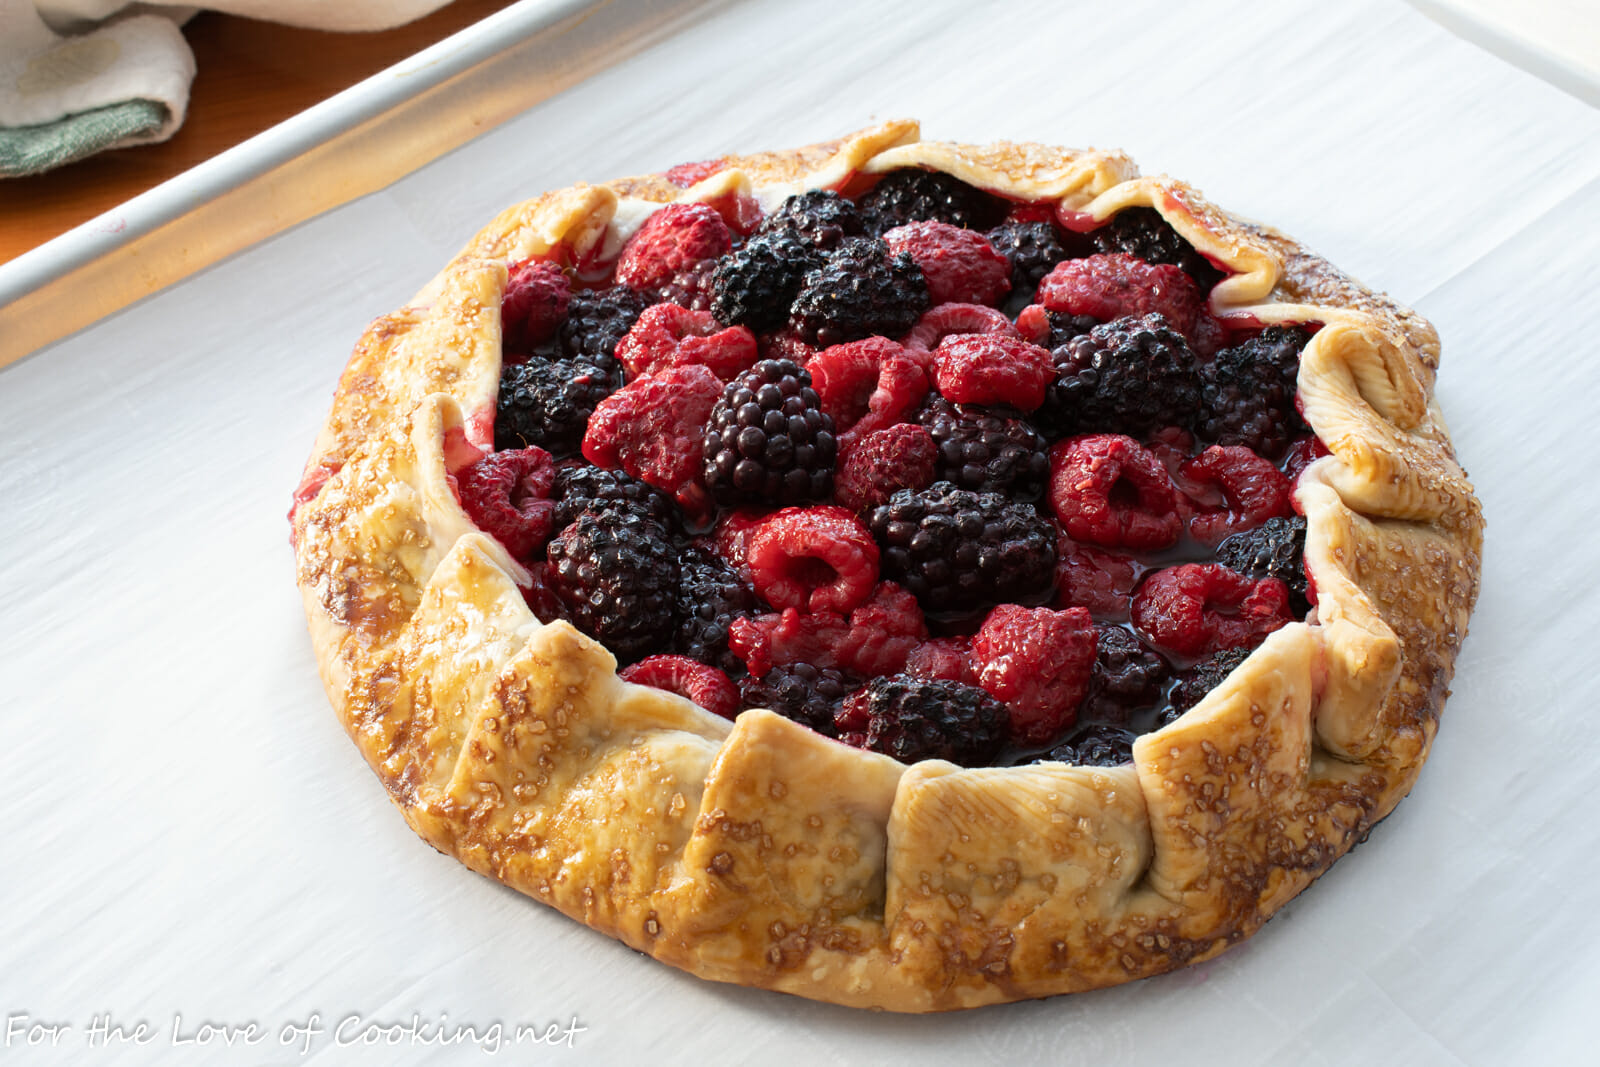 Raspberry and Blackberry Galette with Lemon Whipped Cream